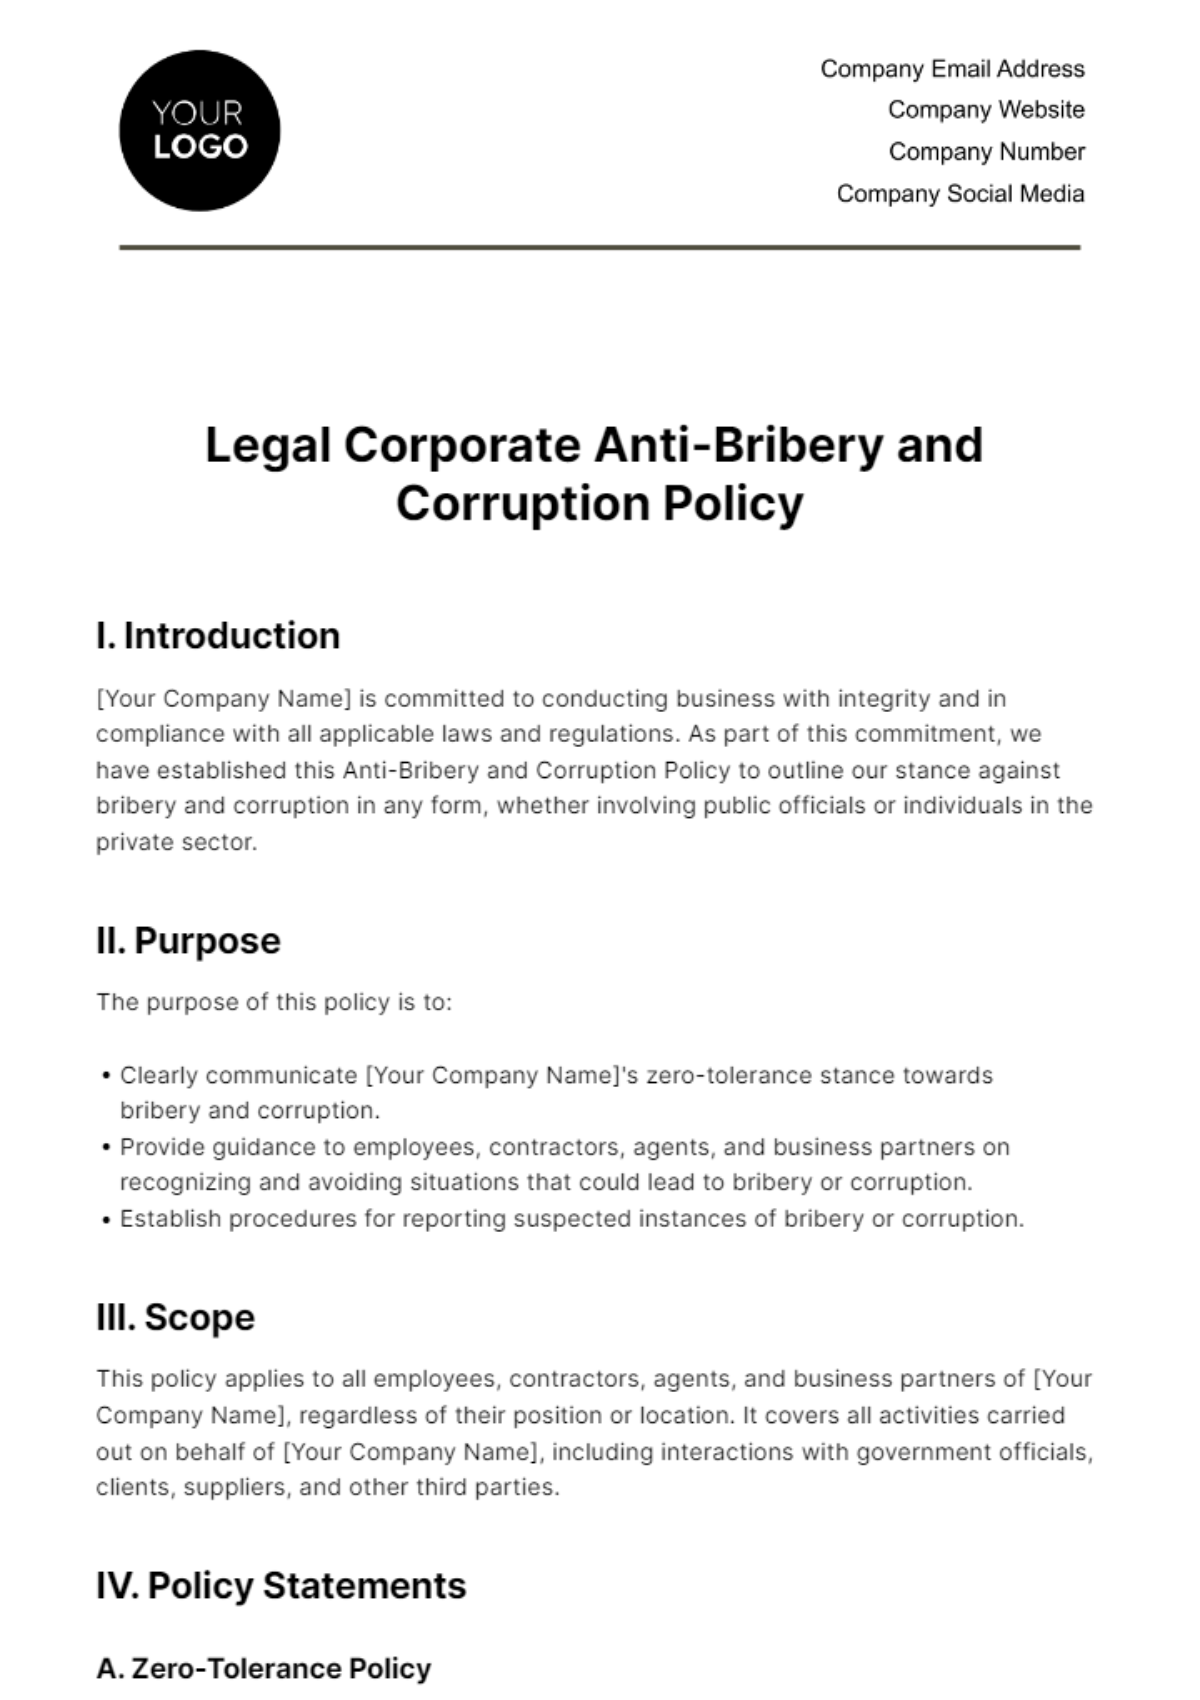 Legal Corporate Anti-Bribery and Corruption Policy Template